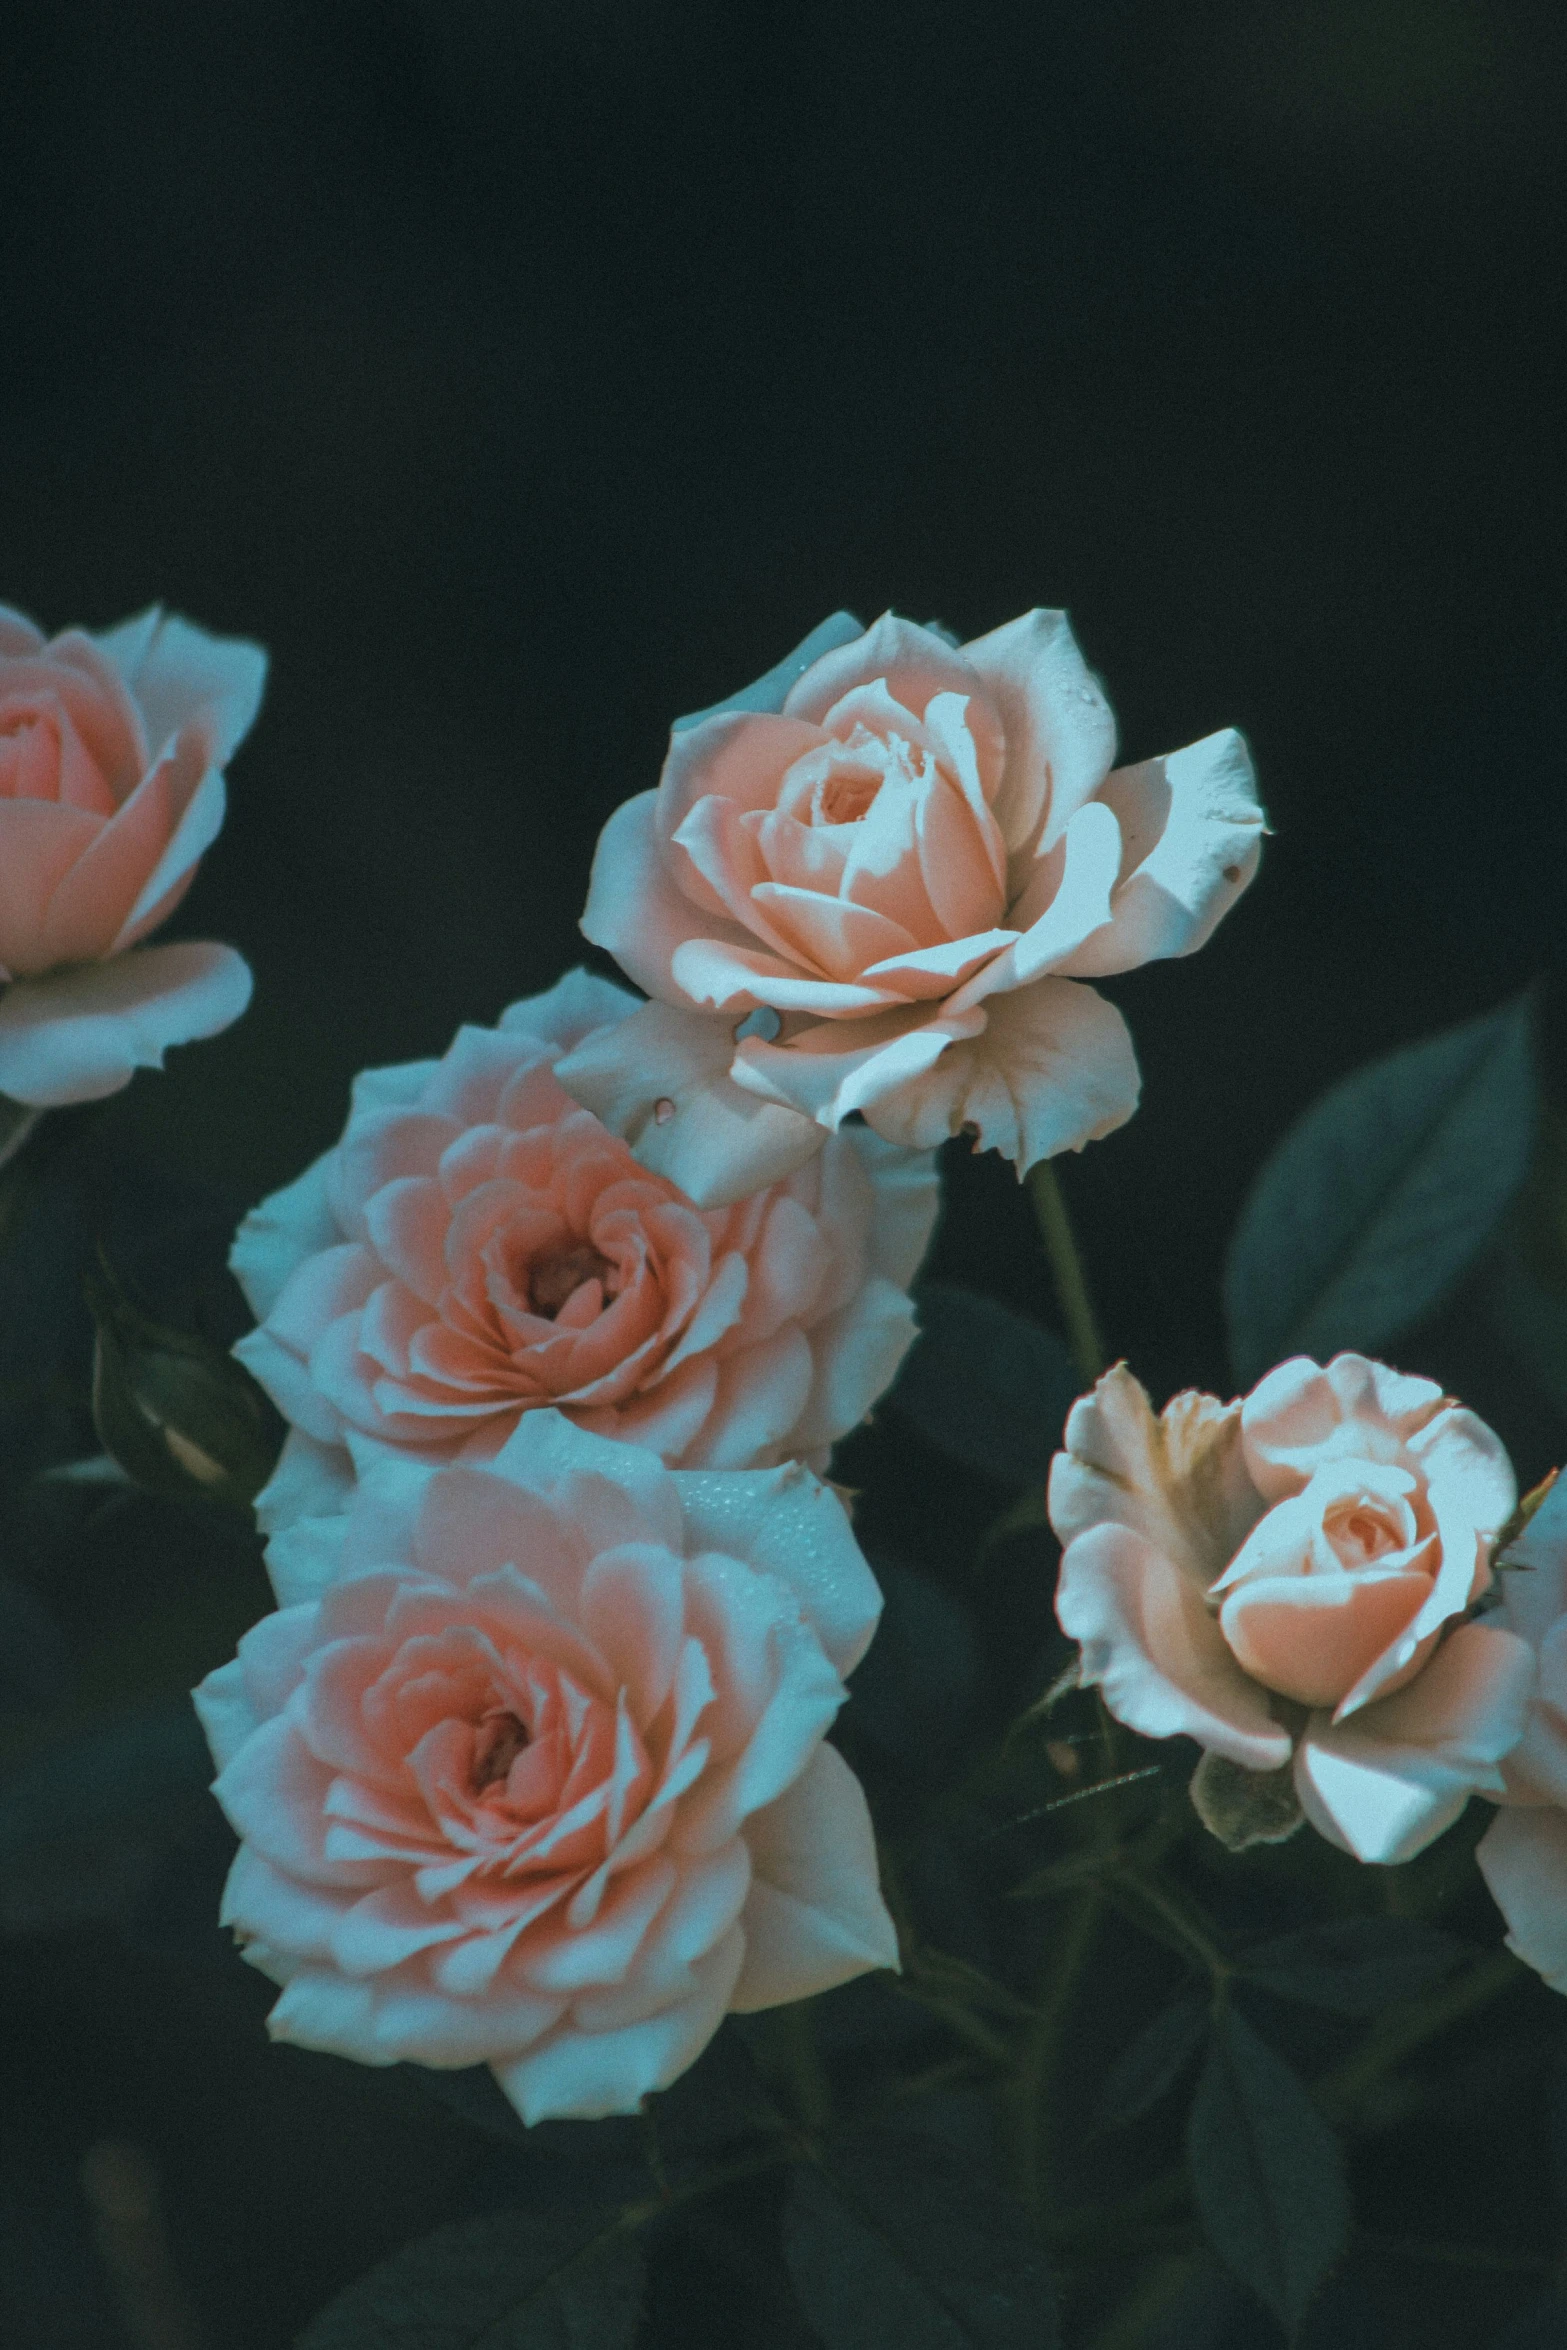 a group of white and peach roses with their stems extended